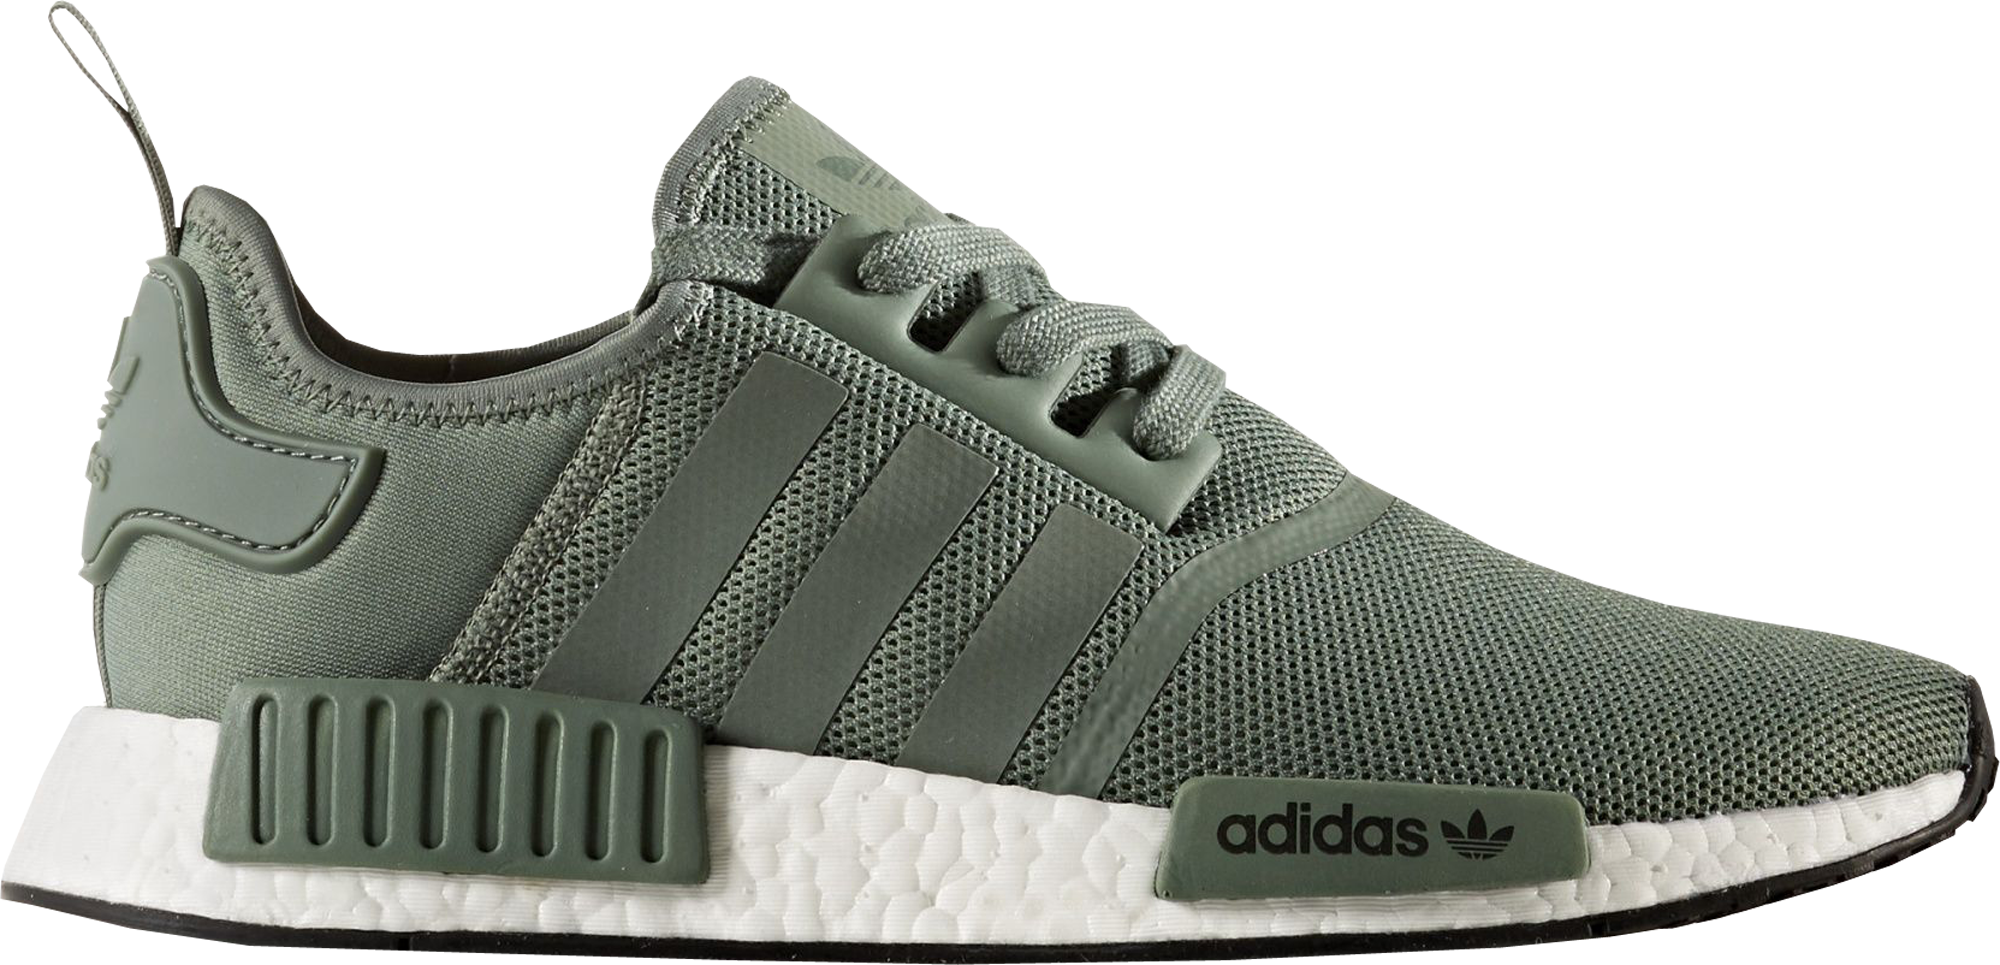 adidas NMD R1 Trace Green - BY9692